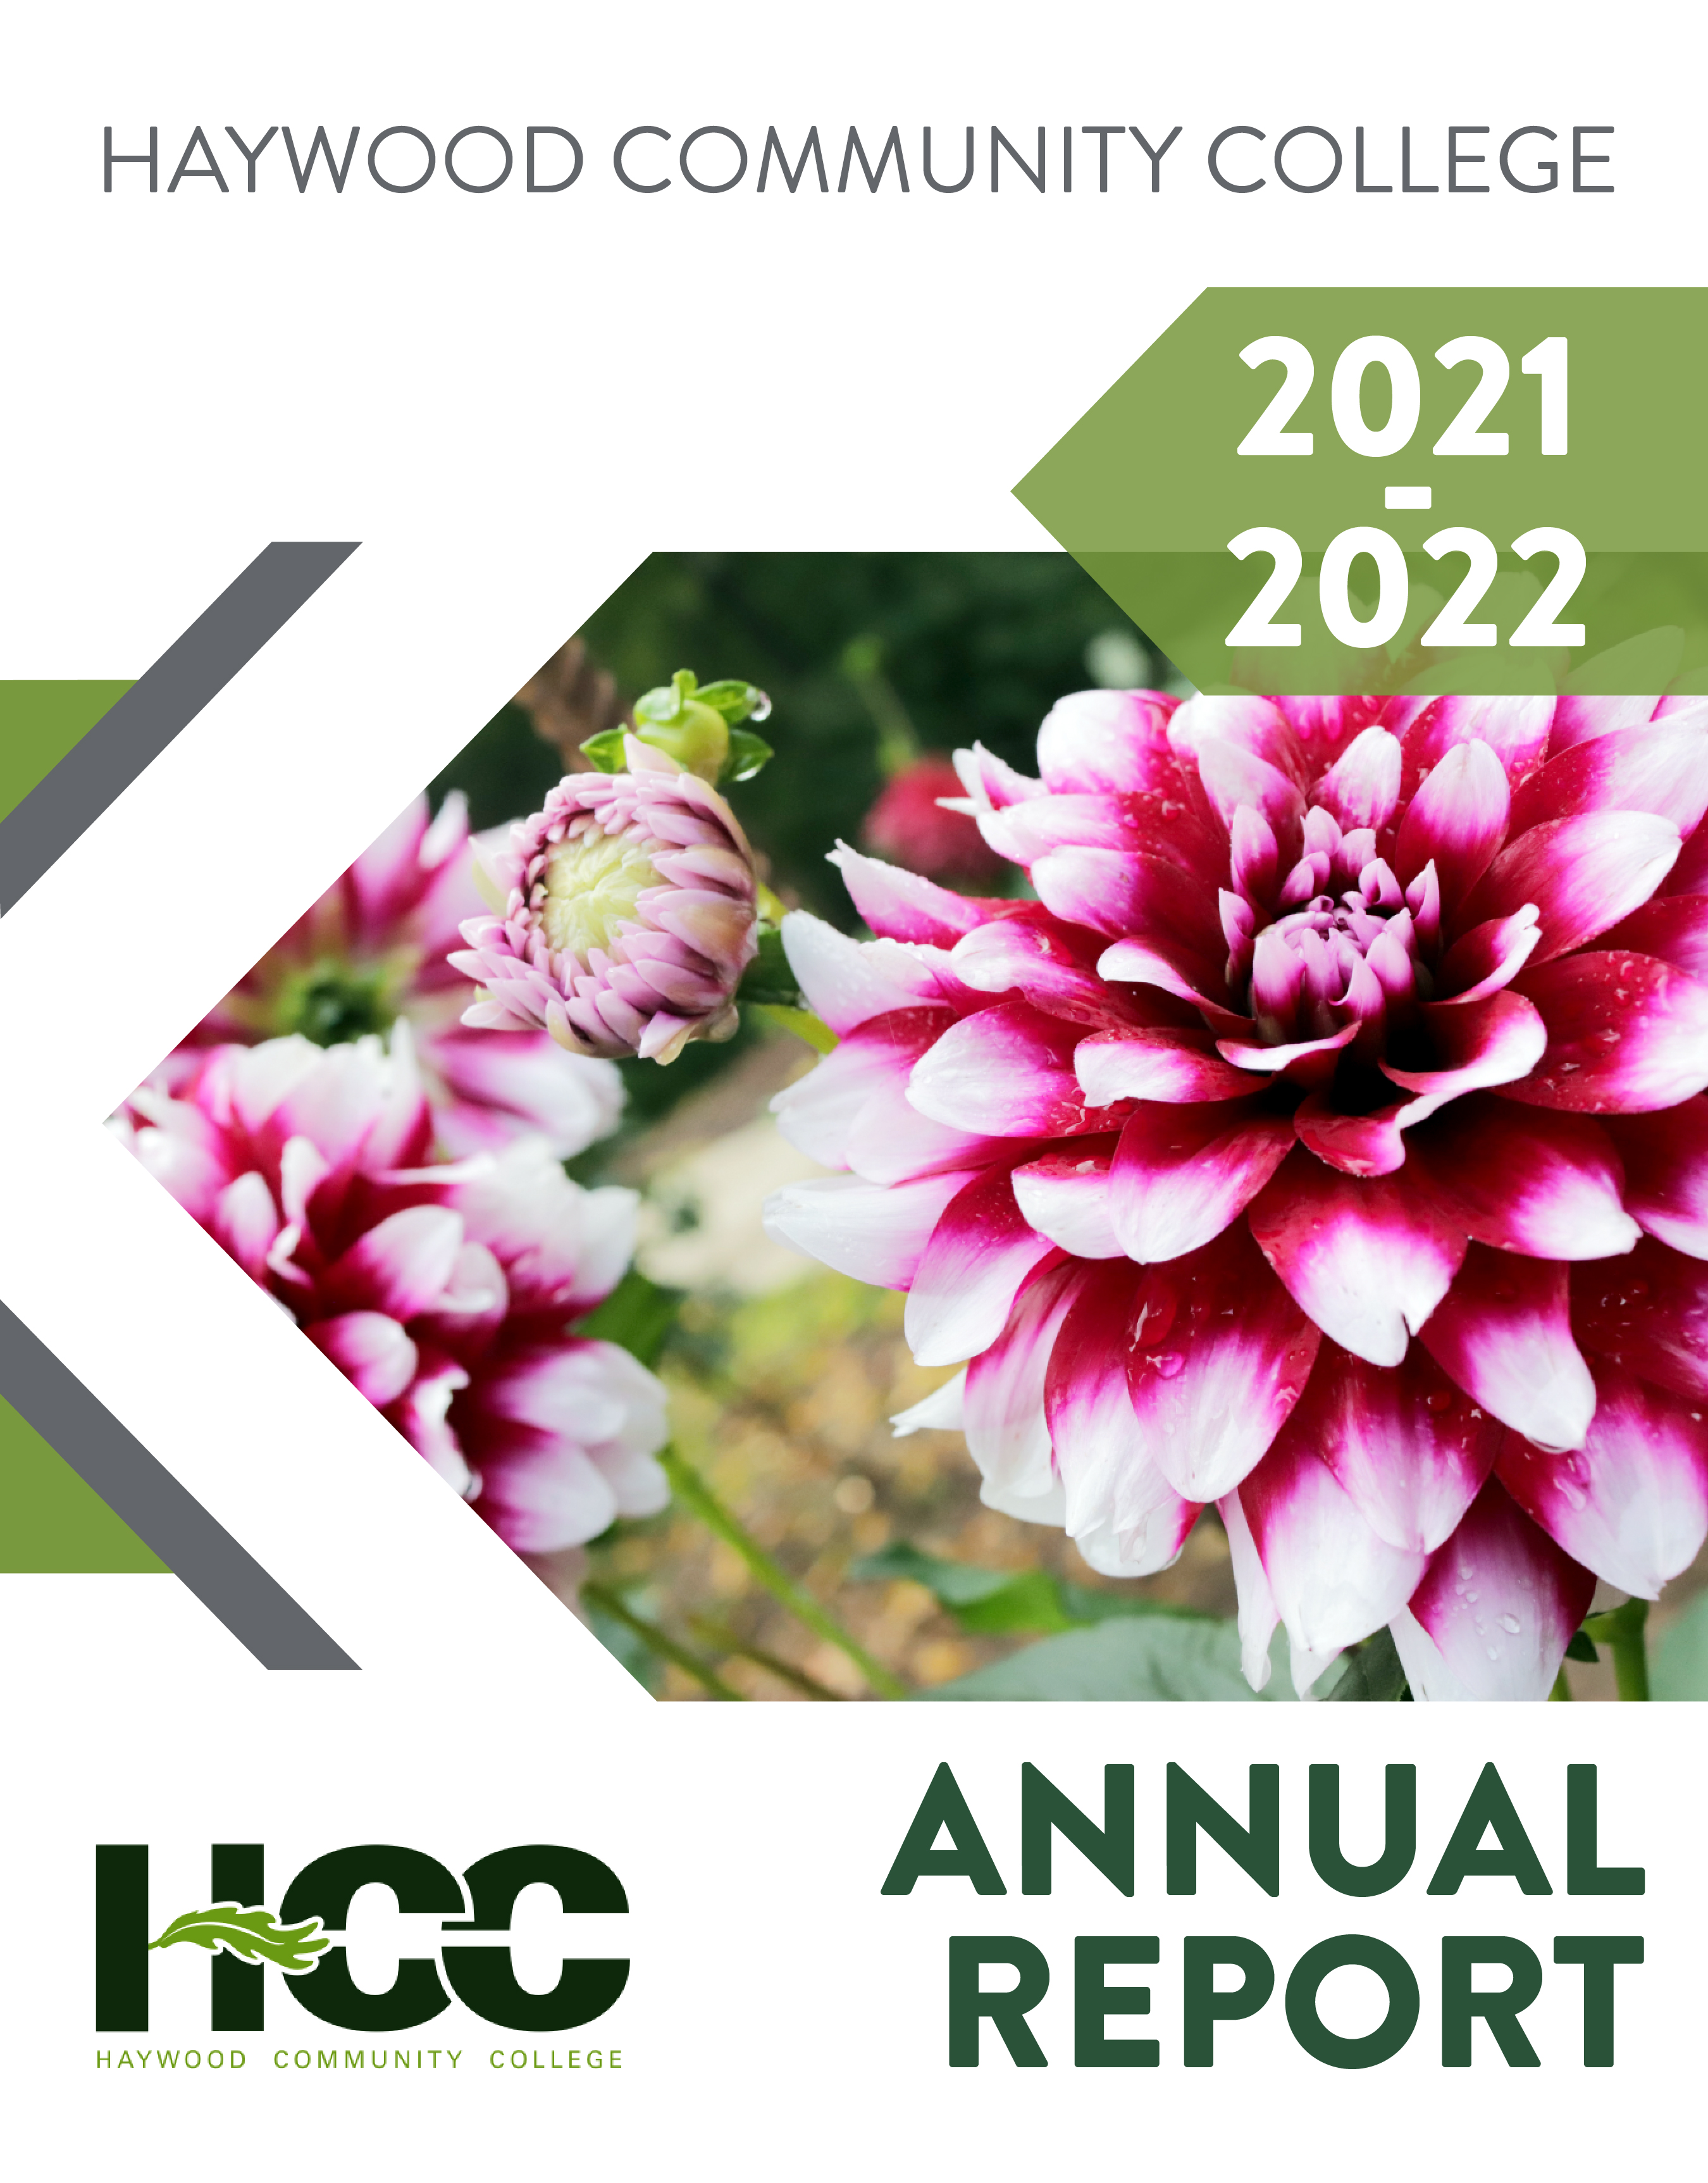 2021-2022 Annual Report cover with pink dahlia